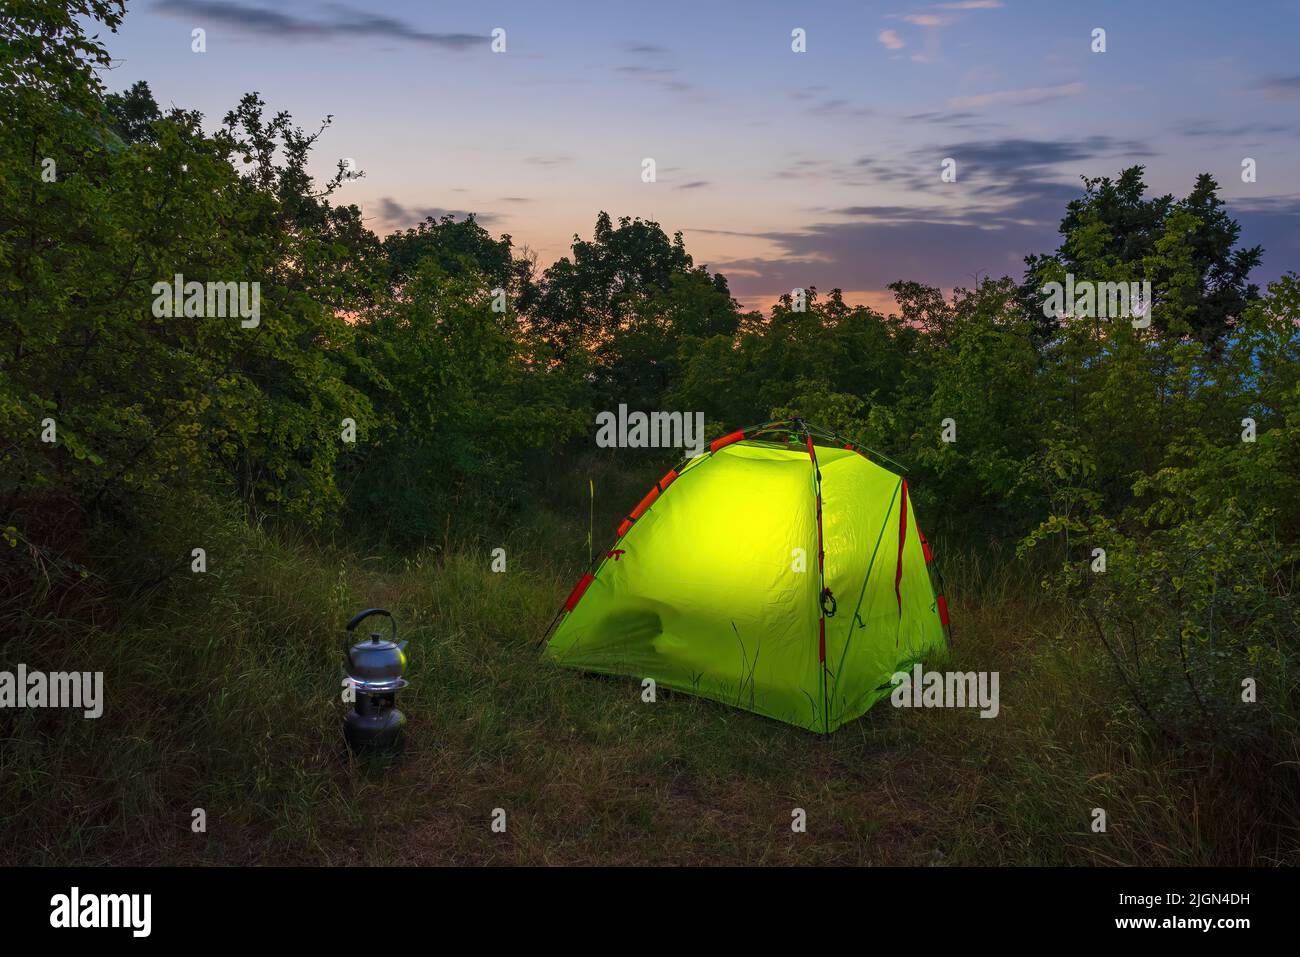 Light in a tent camping at night Stock Photo